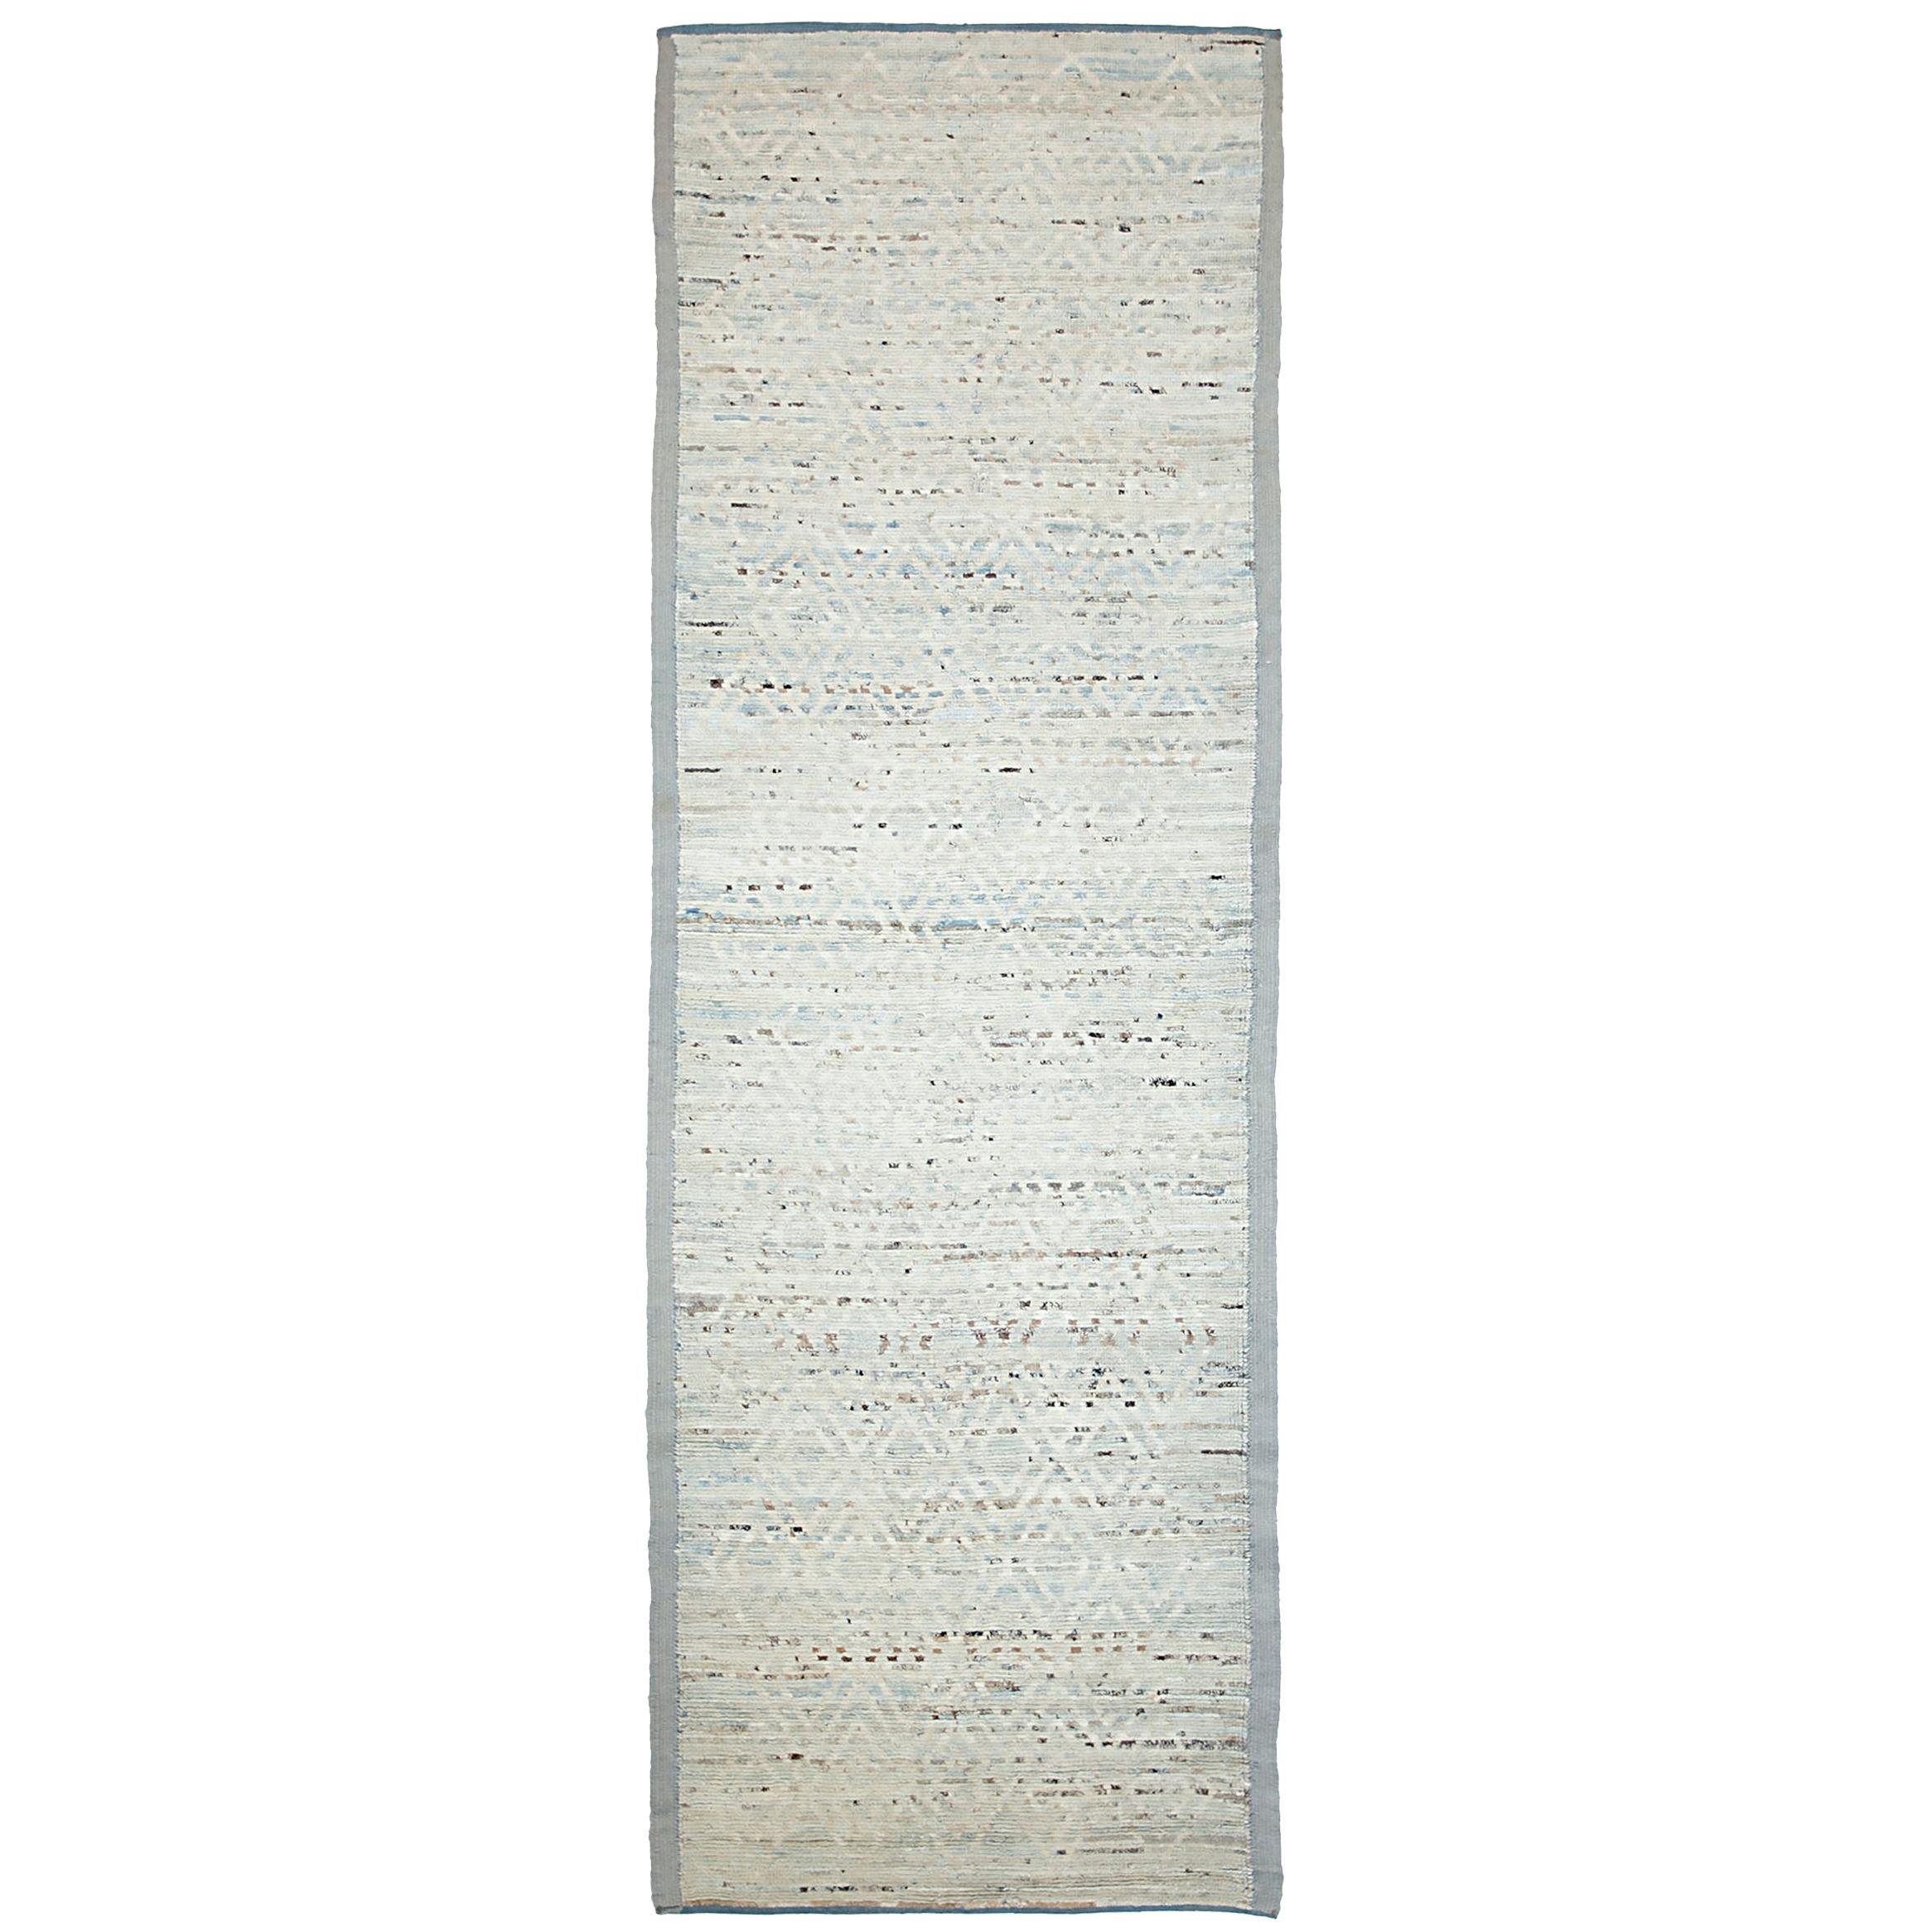 Nazmiyal Collection Soft Cream Modern Moroccan Style Rug 3 ft 4 in x 10 ft 2 in